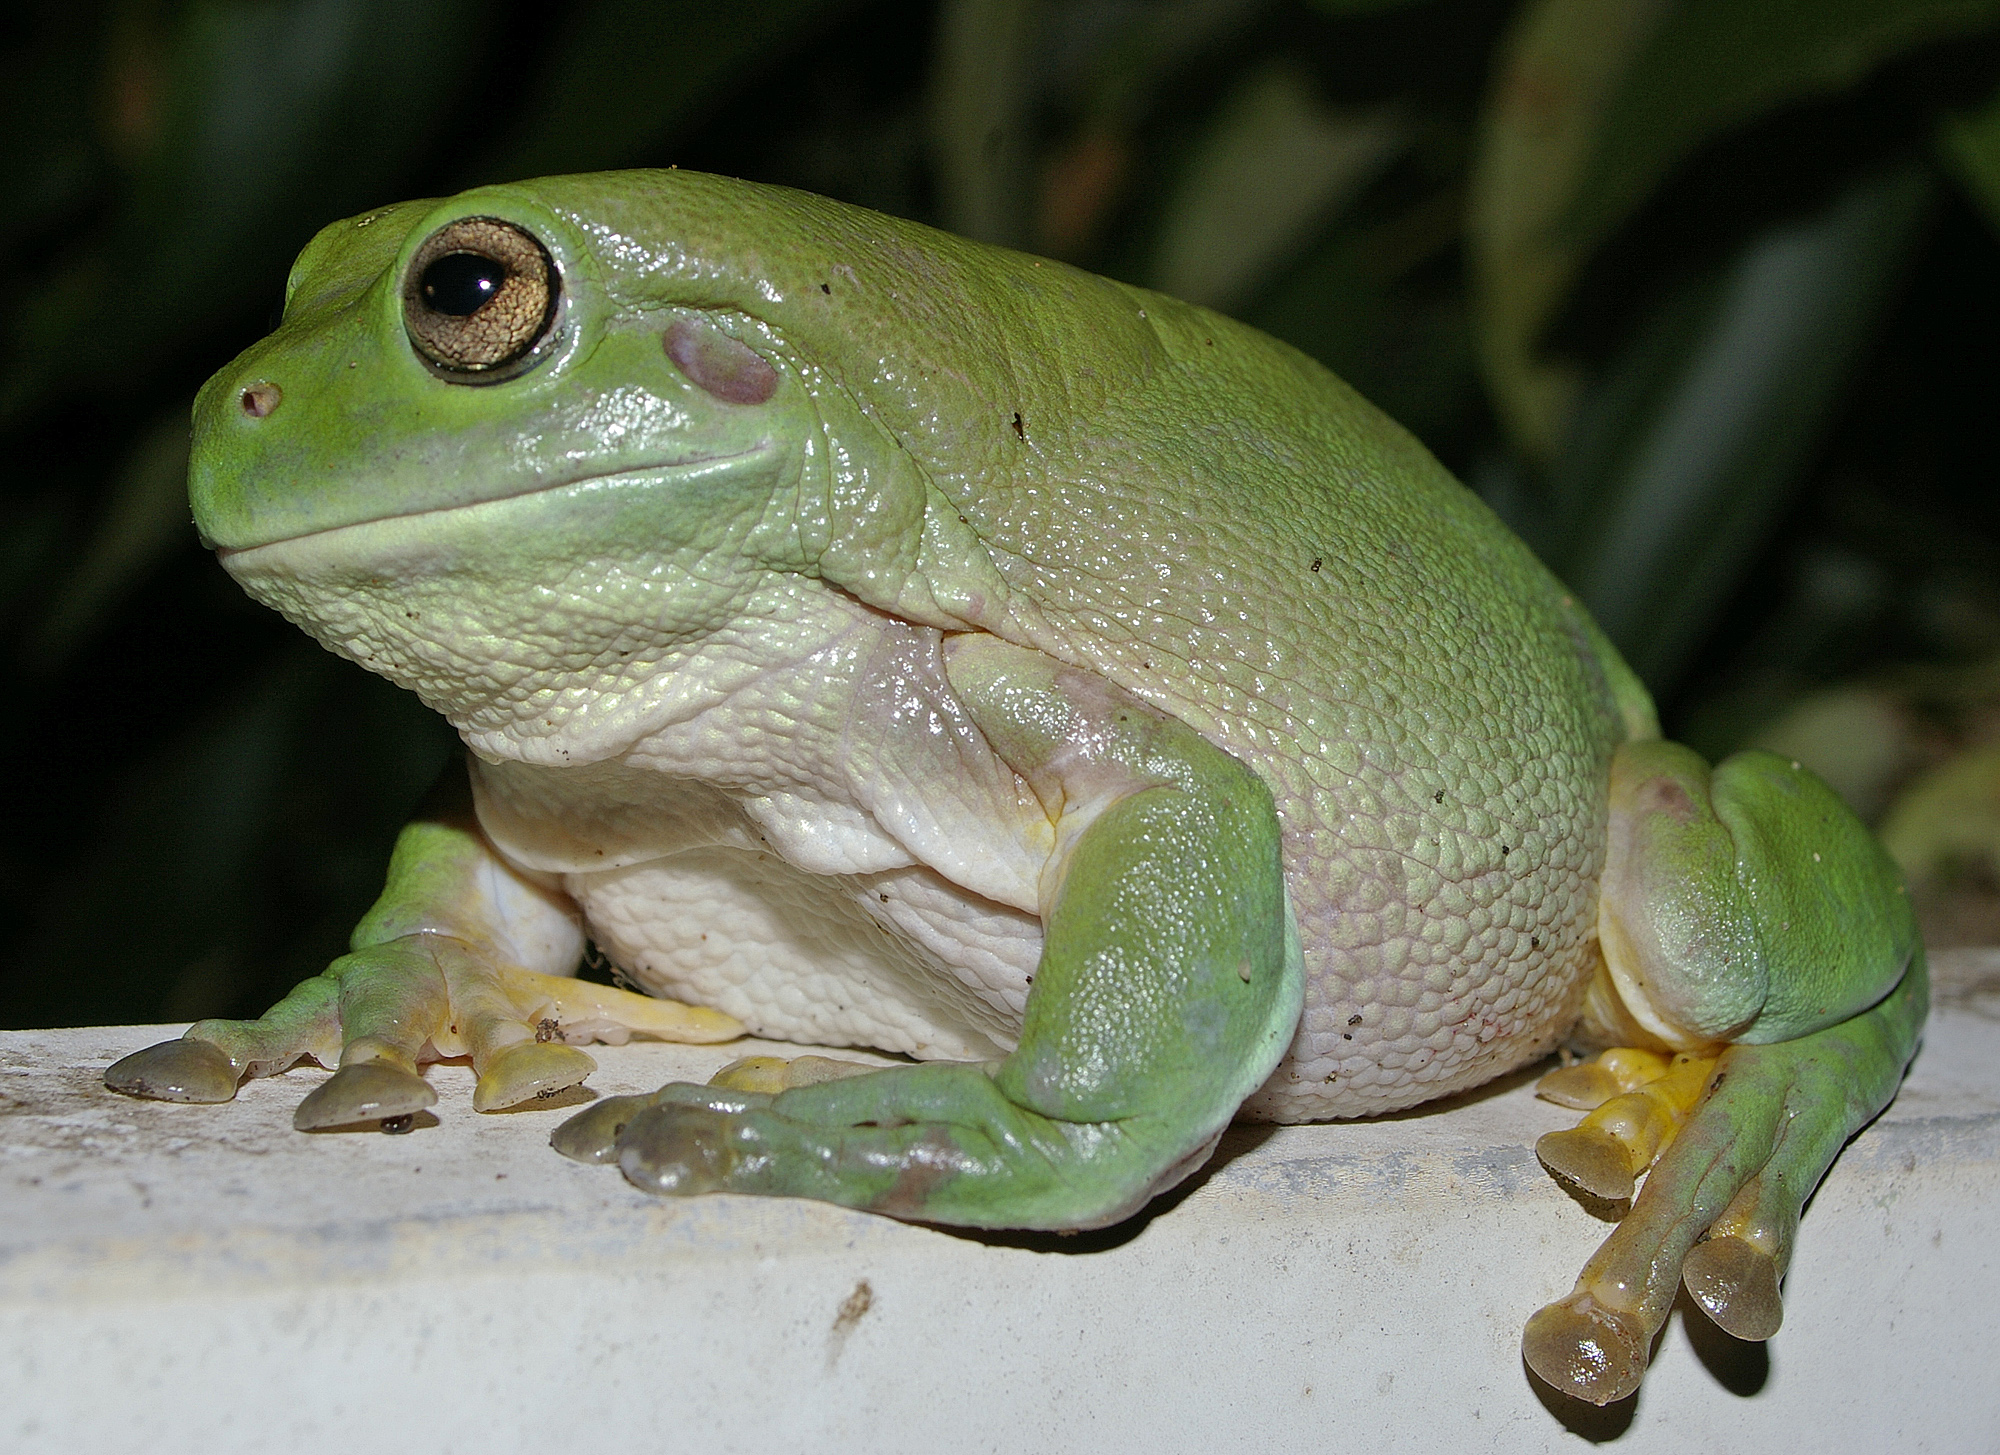 What is the scientific name of the green tree frog?